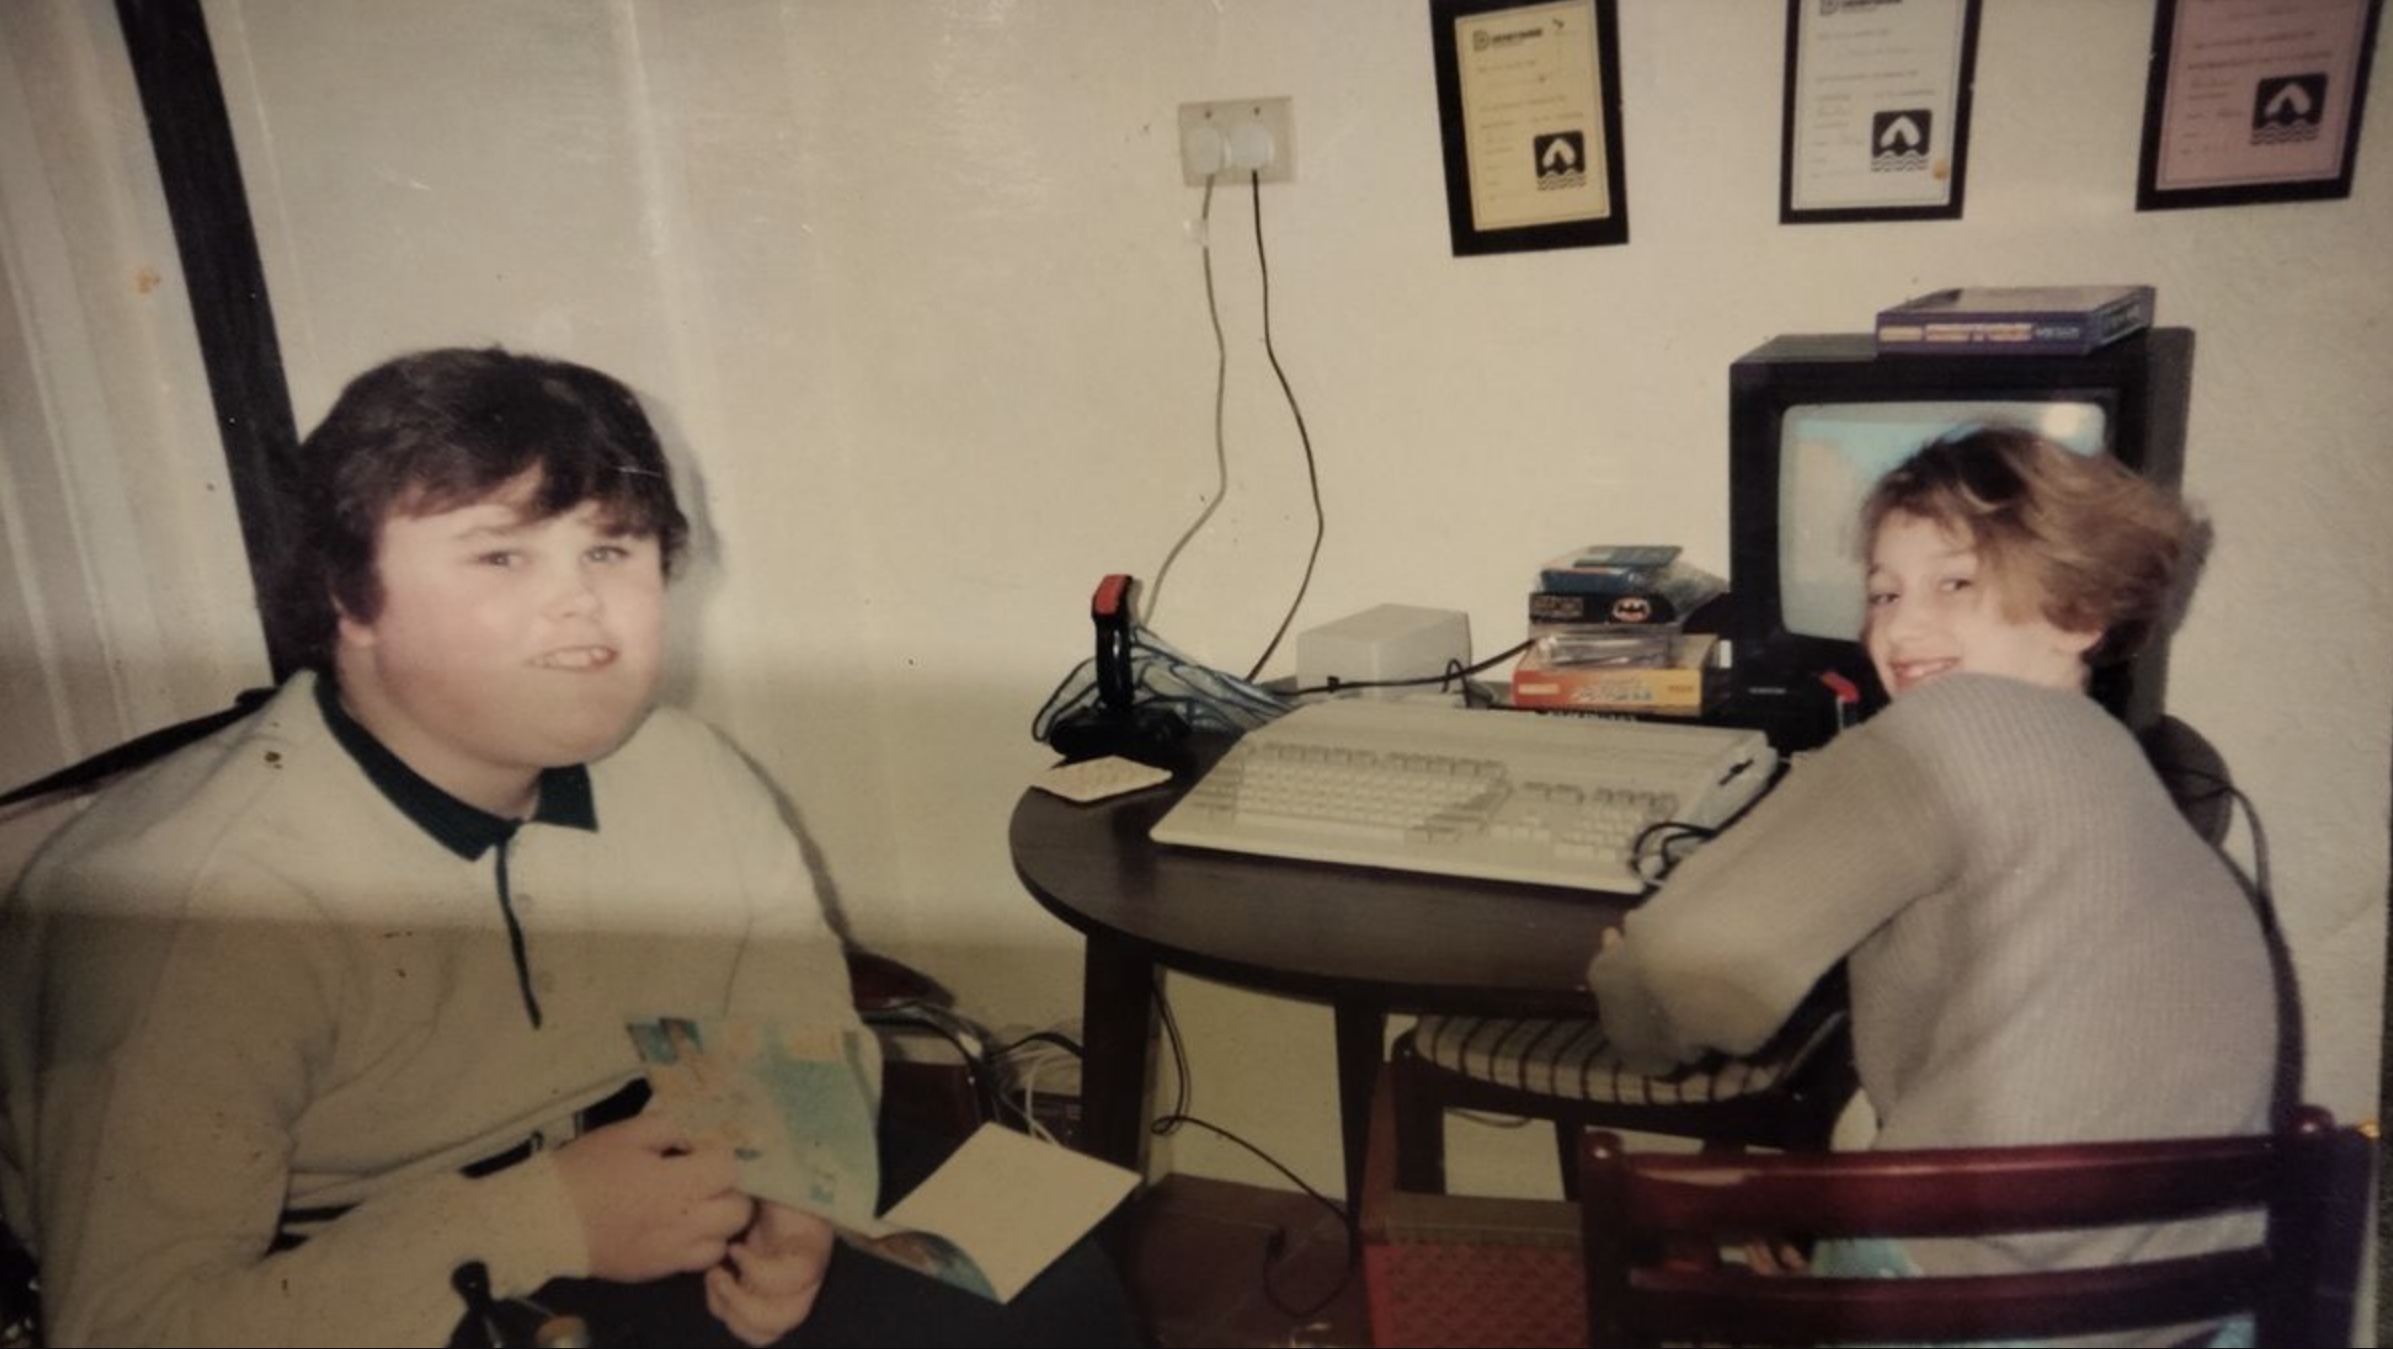 After 30 years, a dead teen's missing computer is discovered, but the contents move the mother to tears.